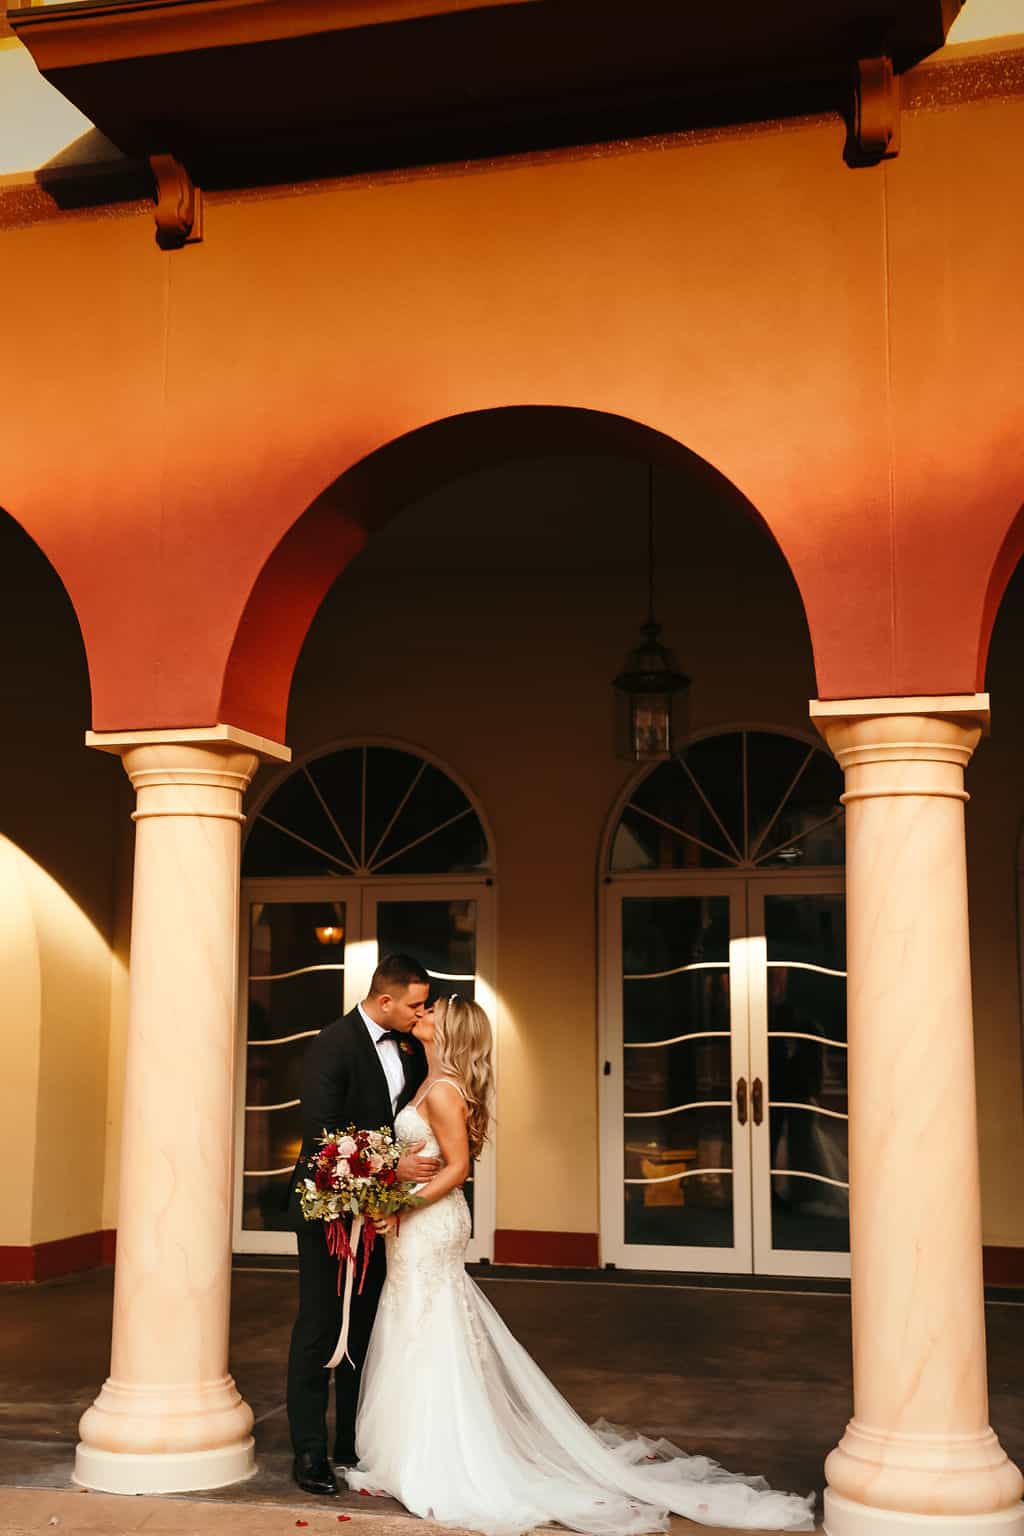 Orlando Wedding Venues - Just Marry Weddings - Brittany Lee Photography